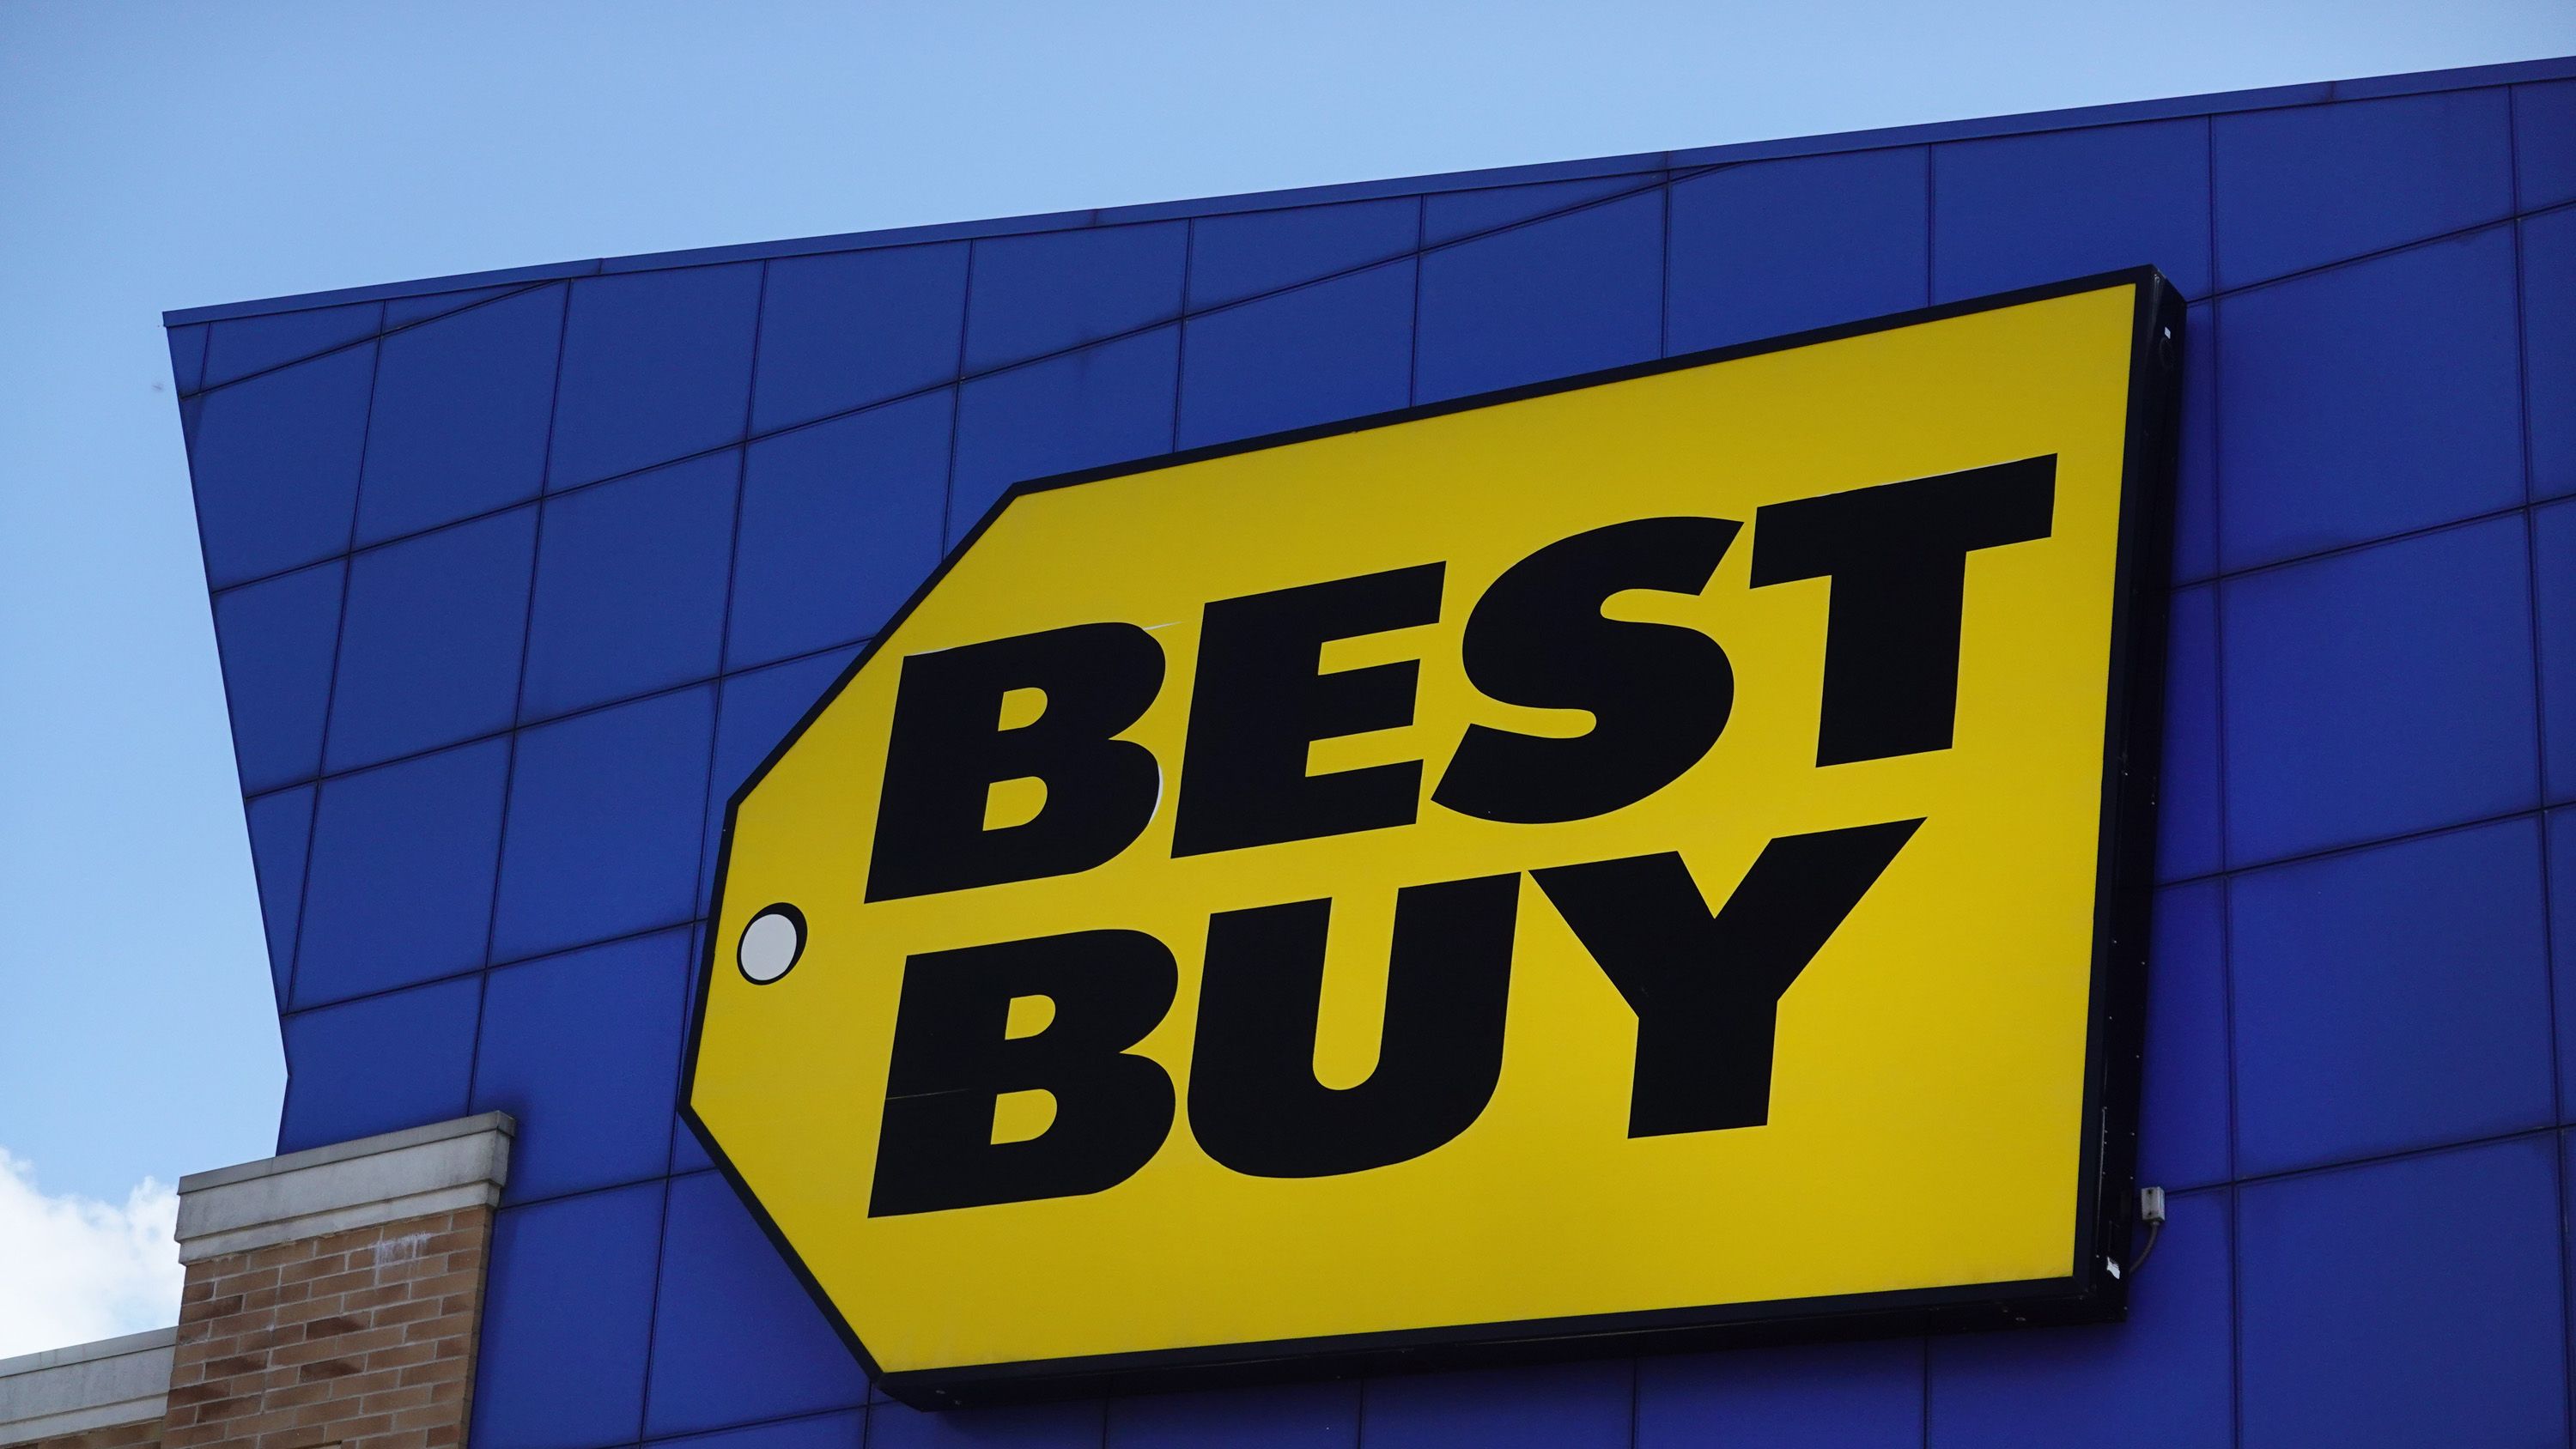 Open-Box TVs at Best Buy: Up to 50% off